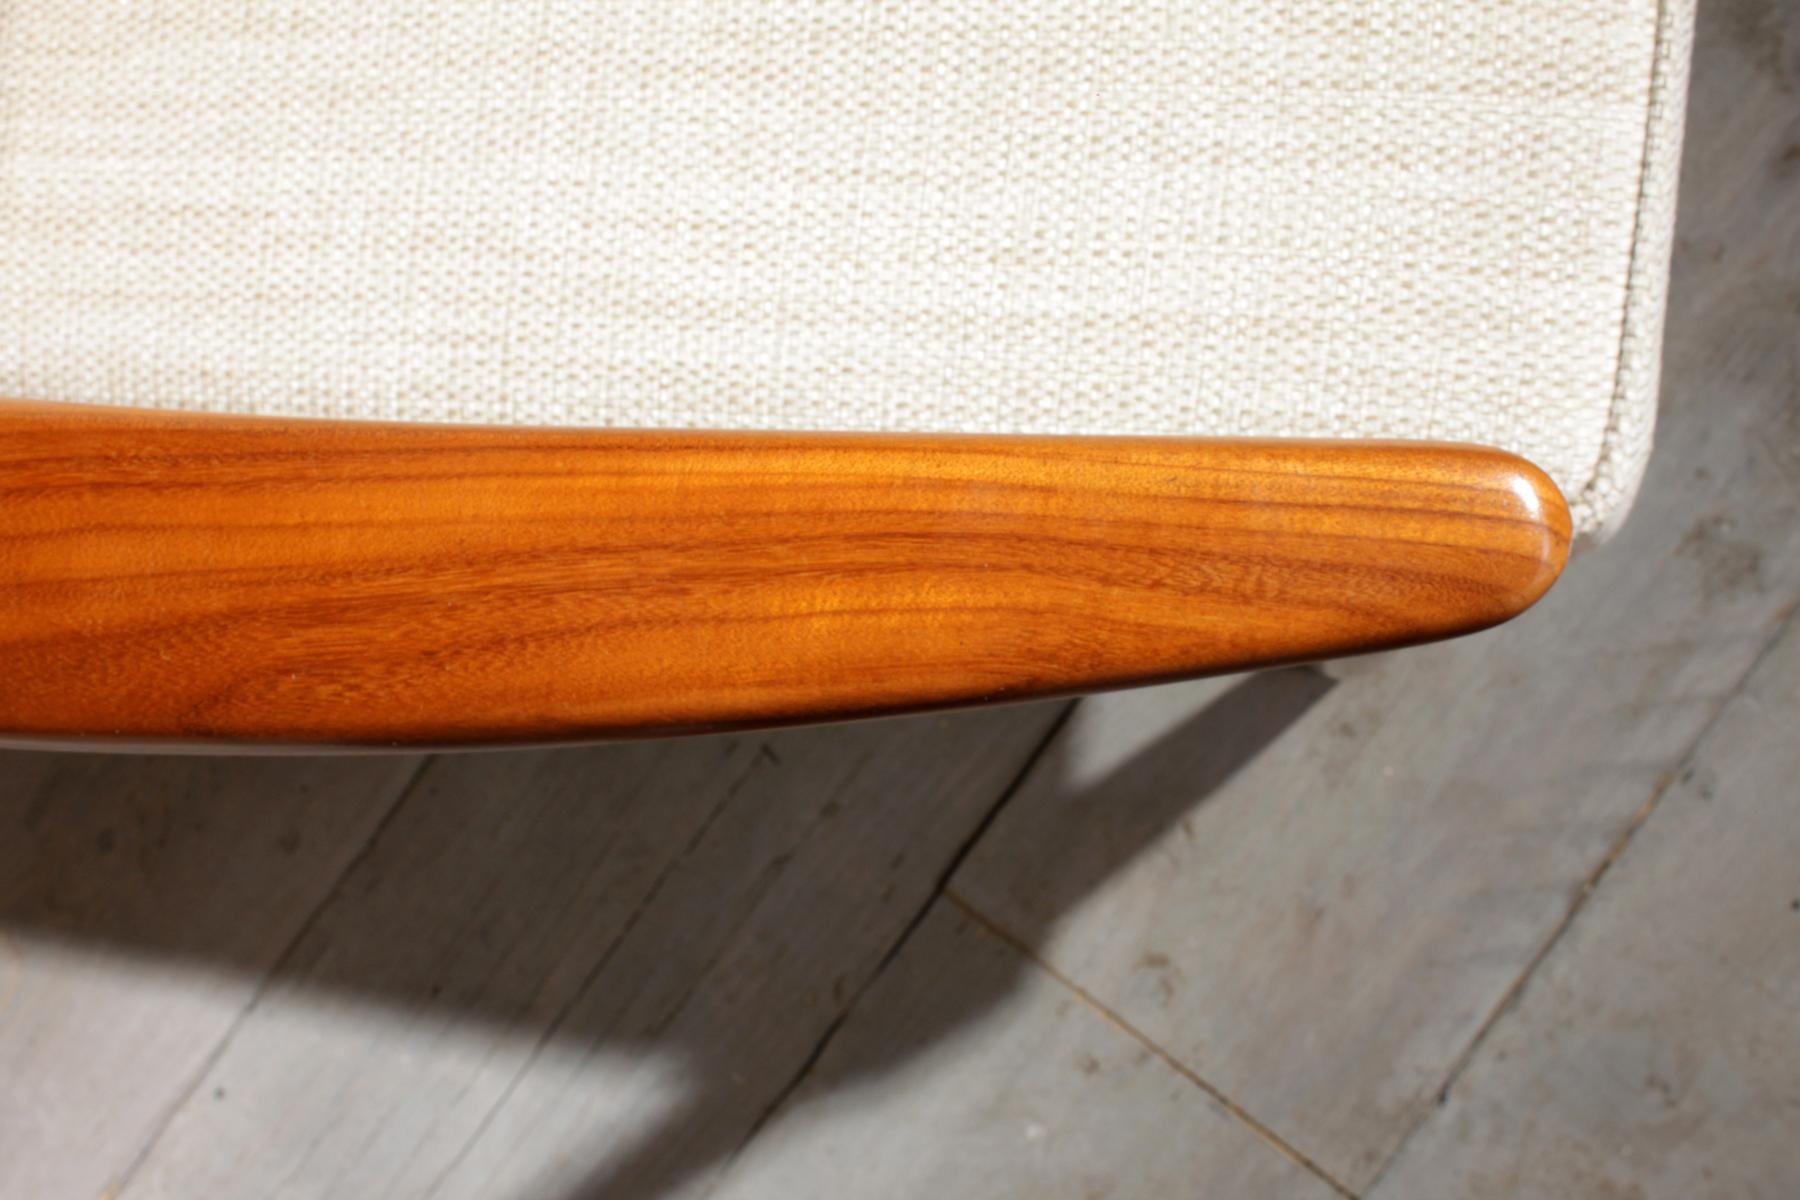 Midcentury teak sofa, circa 1960
This teak two-seat sofa was produced in the 1960s in Denmark she has a lovely shaped back and solid frame there are no old breaks or repairs and all the joints are solid.

The wood on the sofa has been repolished